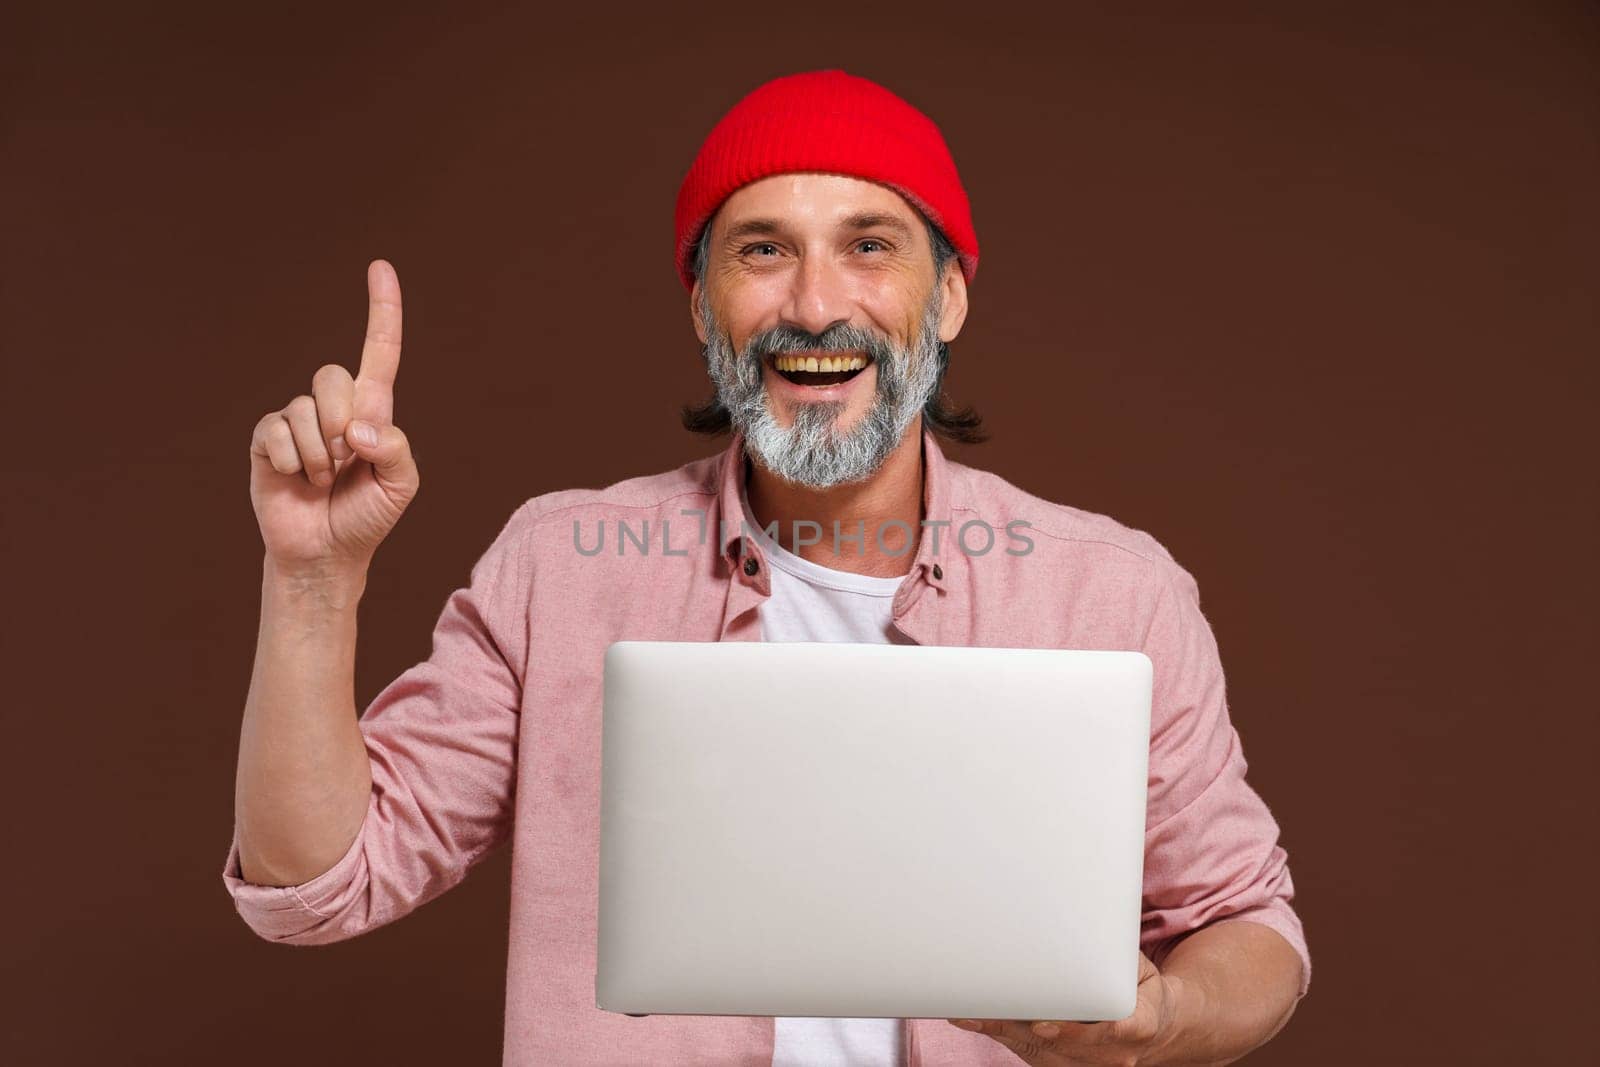 Available information on the concept network. Eureka. Quick search for solution. man holds laptop and pointing up with finger of other hand, symbolizing eureka moment of finding quick solution through online networks and digital technology. by LipikStockMedia